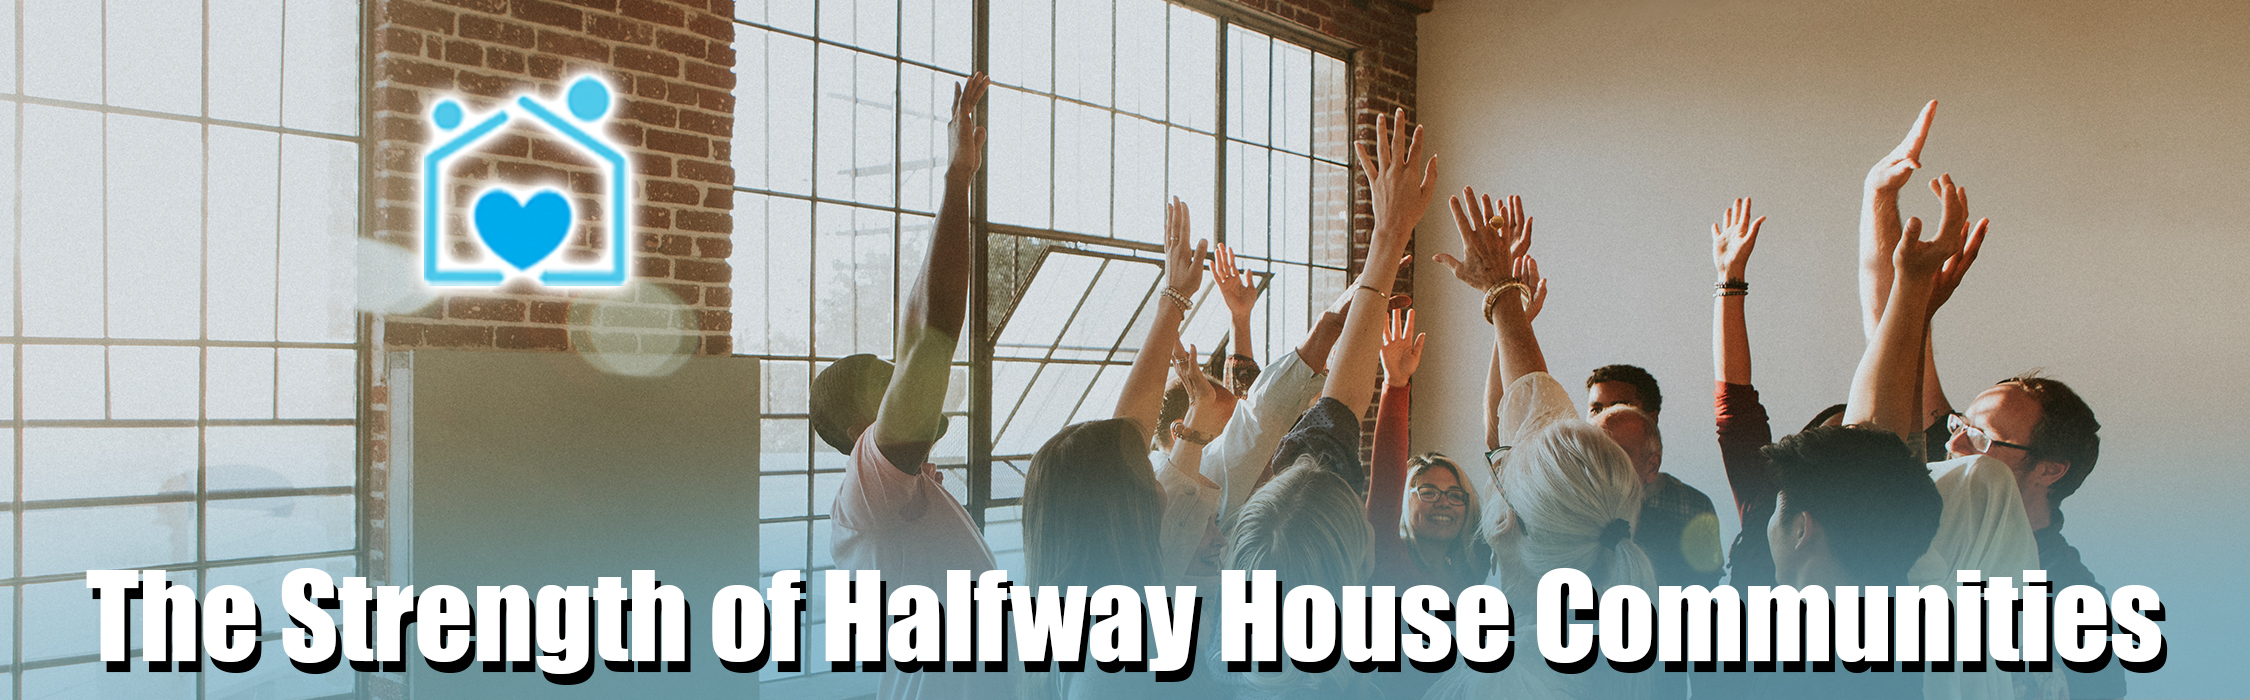 The Strength of Halfway House Communities